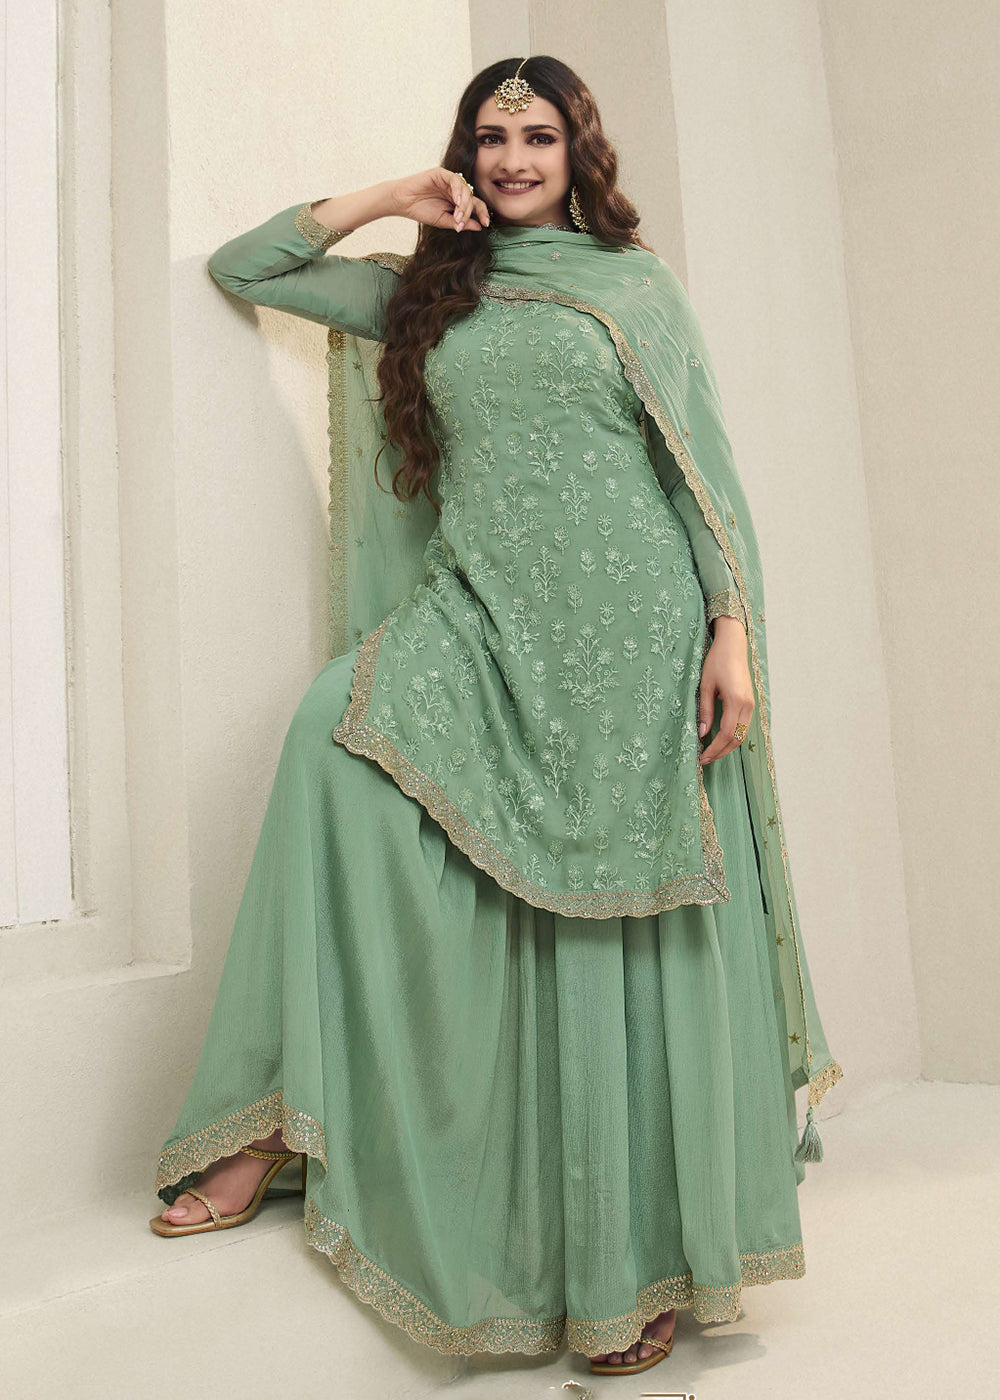 Shop Now Prachi Desai Green Organza Embroidered Sharara Suit Online at Empress Clothing in USA, UK, Canada, Italy & Worldwide. 